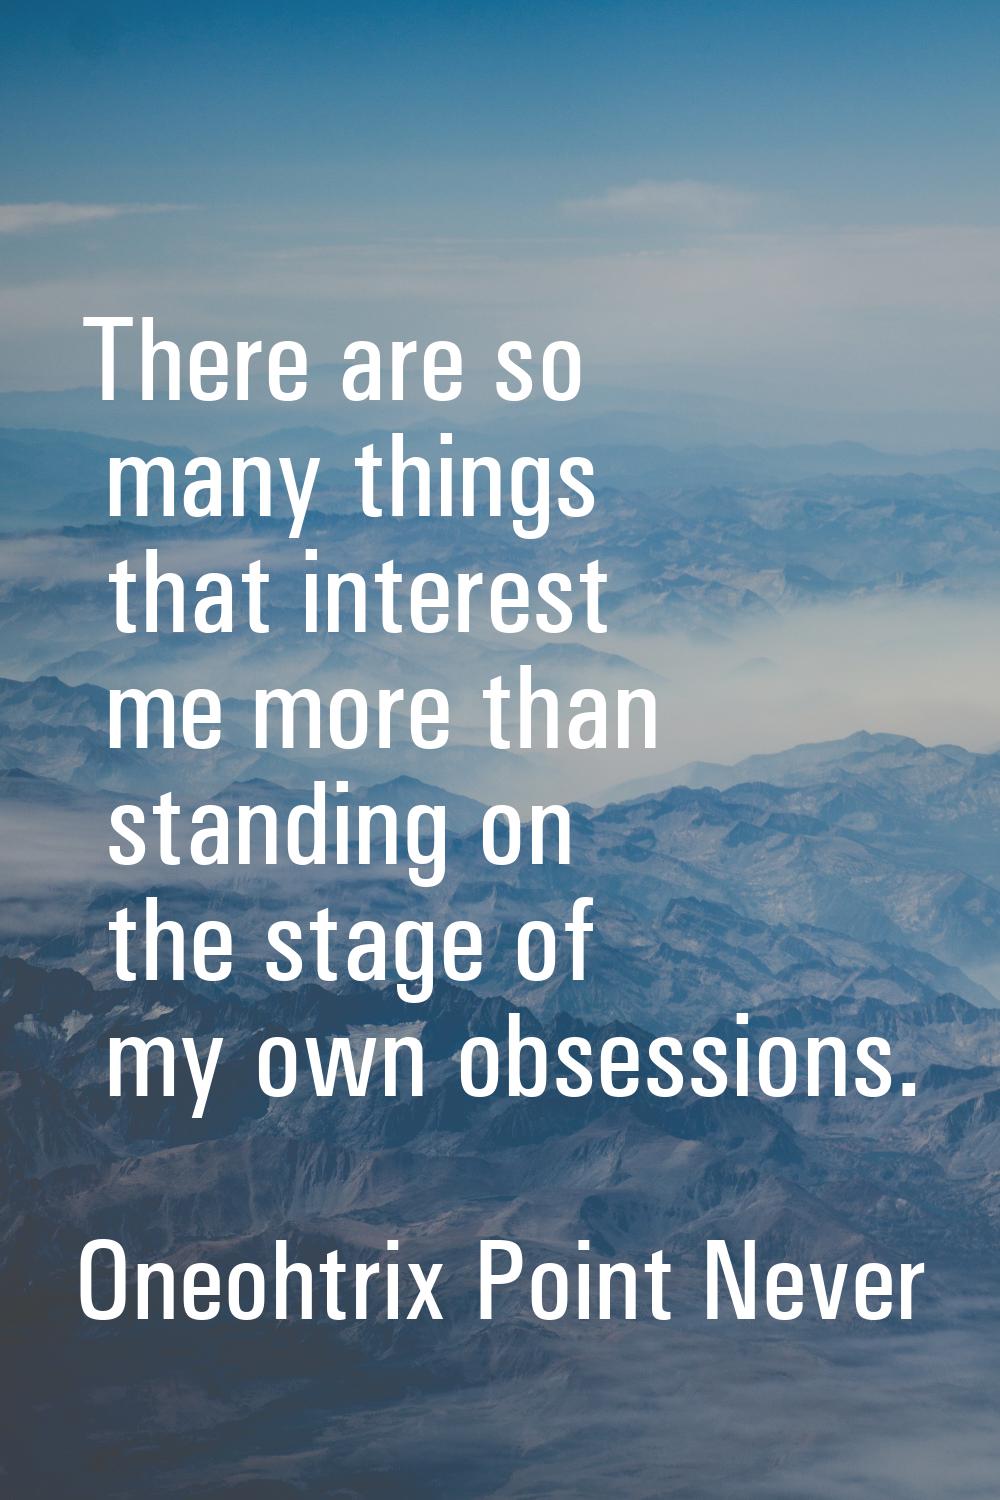 There are so many things that interest me more than standing on the stage of my own obsessions.